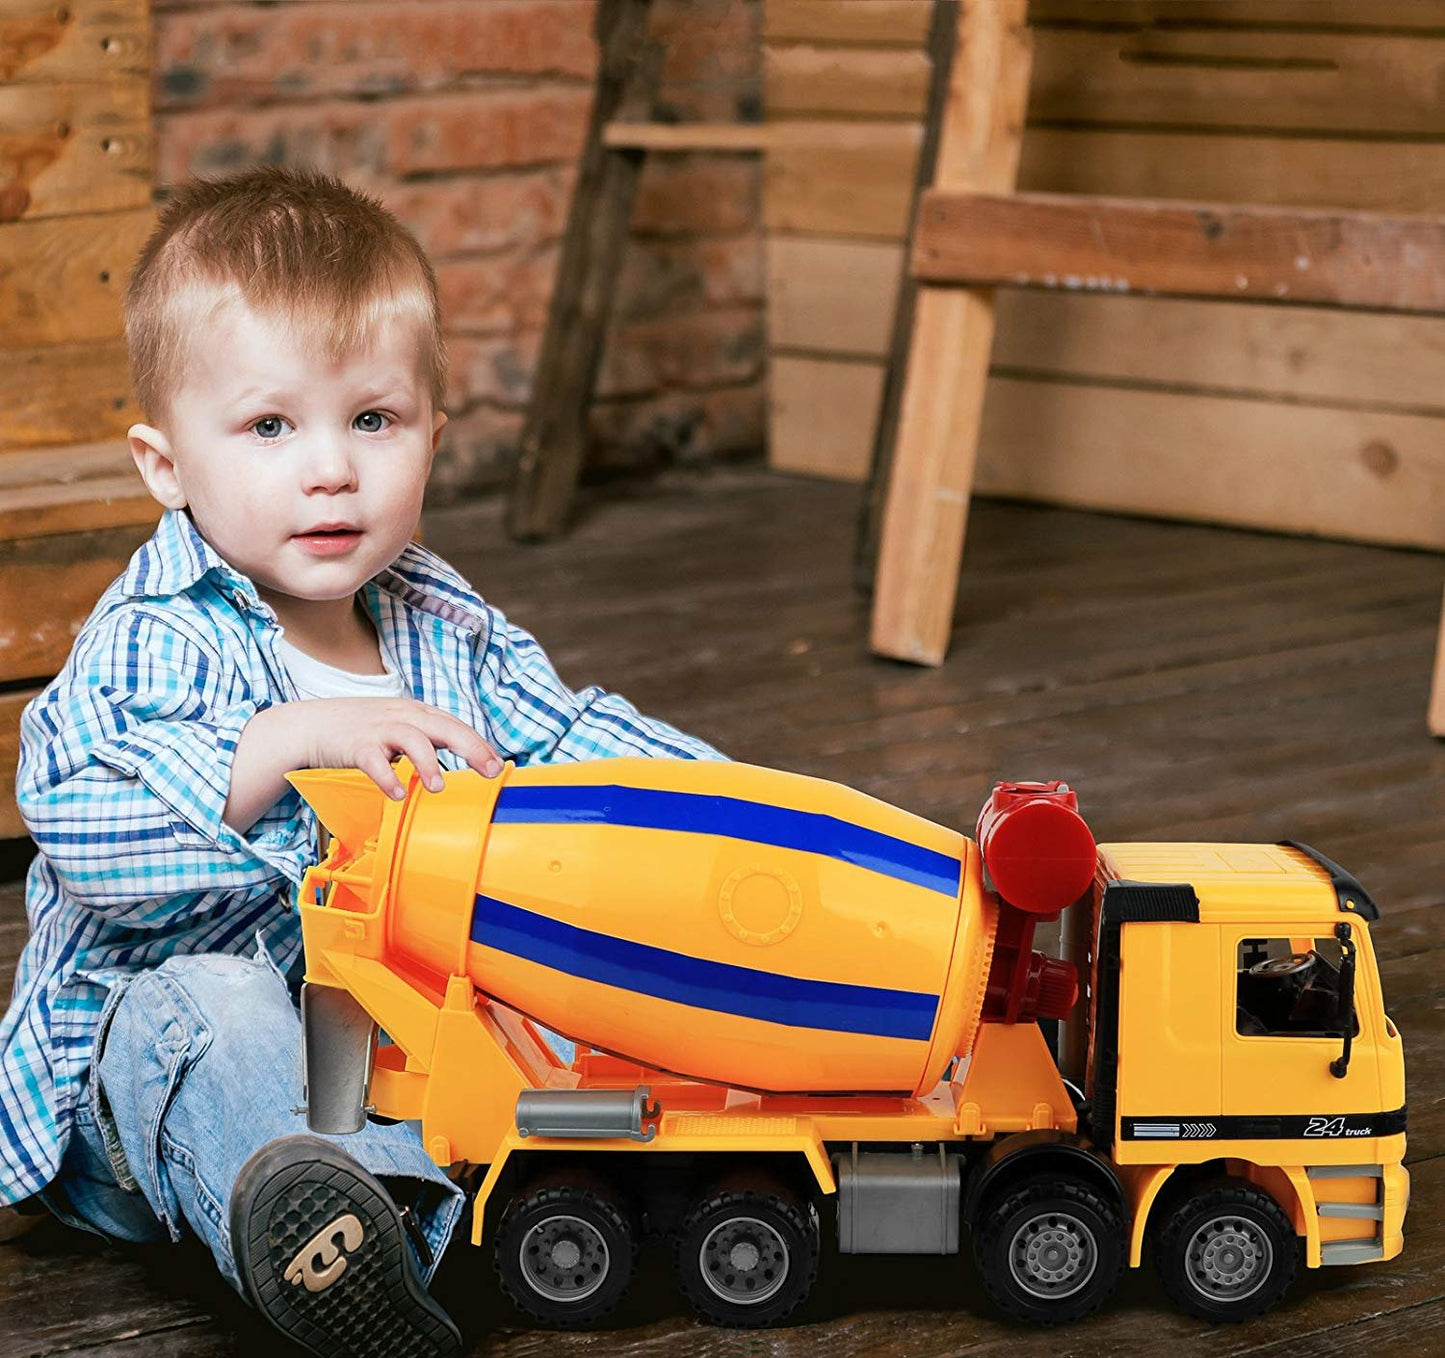 14" Oversized Friction Cement Mixer Truck Construction Vehicle Toy for Kids